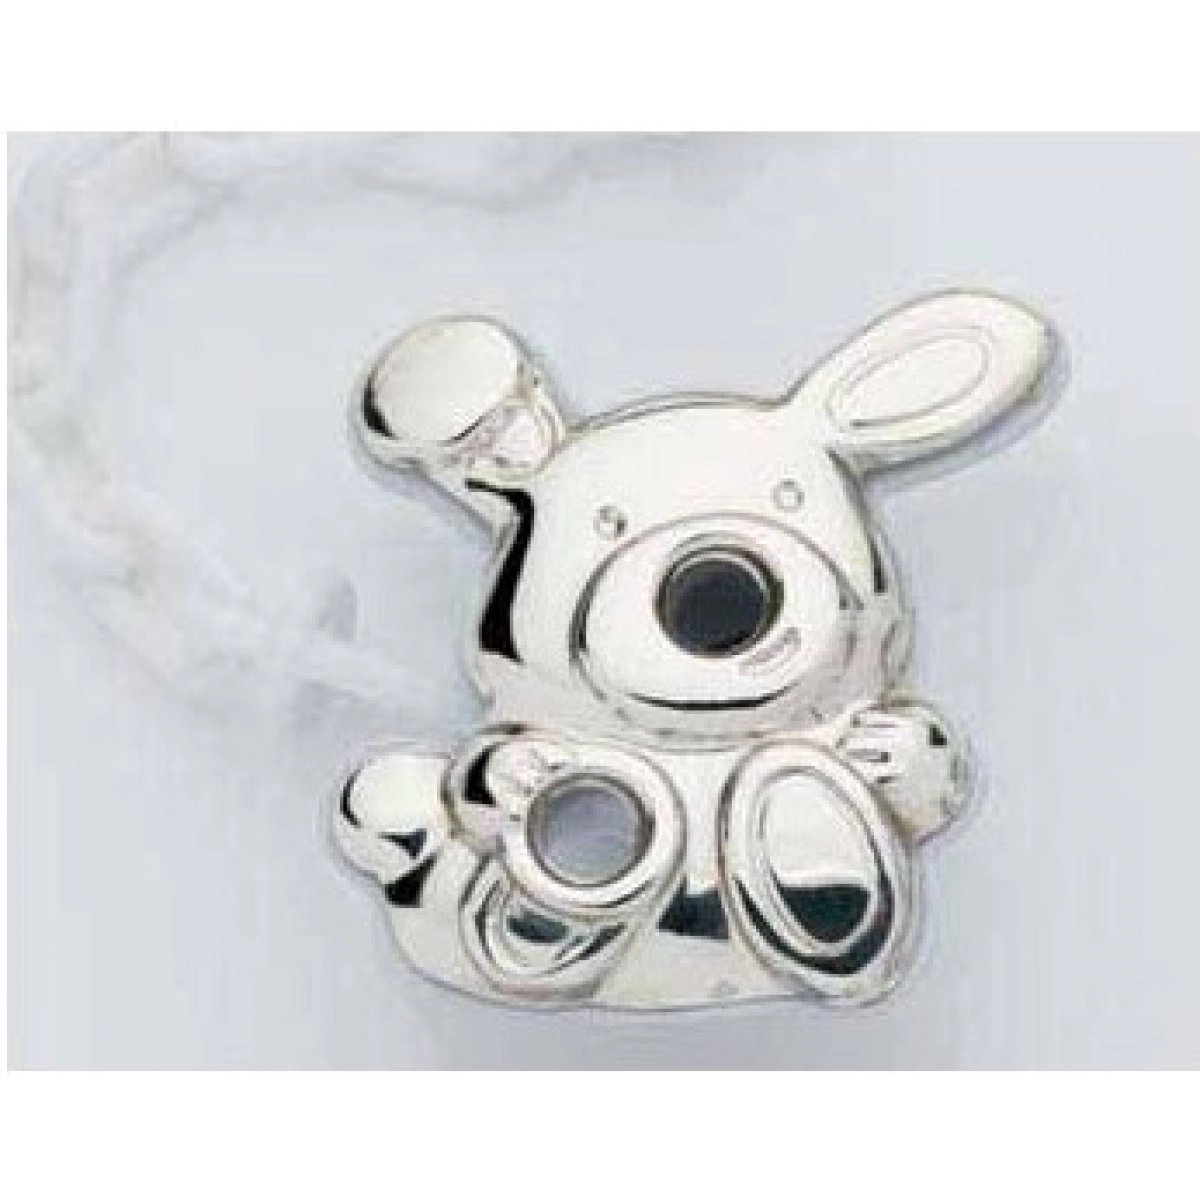 Gift items PINZA PACIFIER SILVER-Craft-0212891